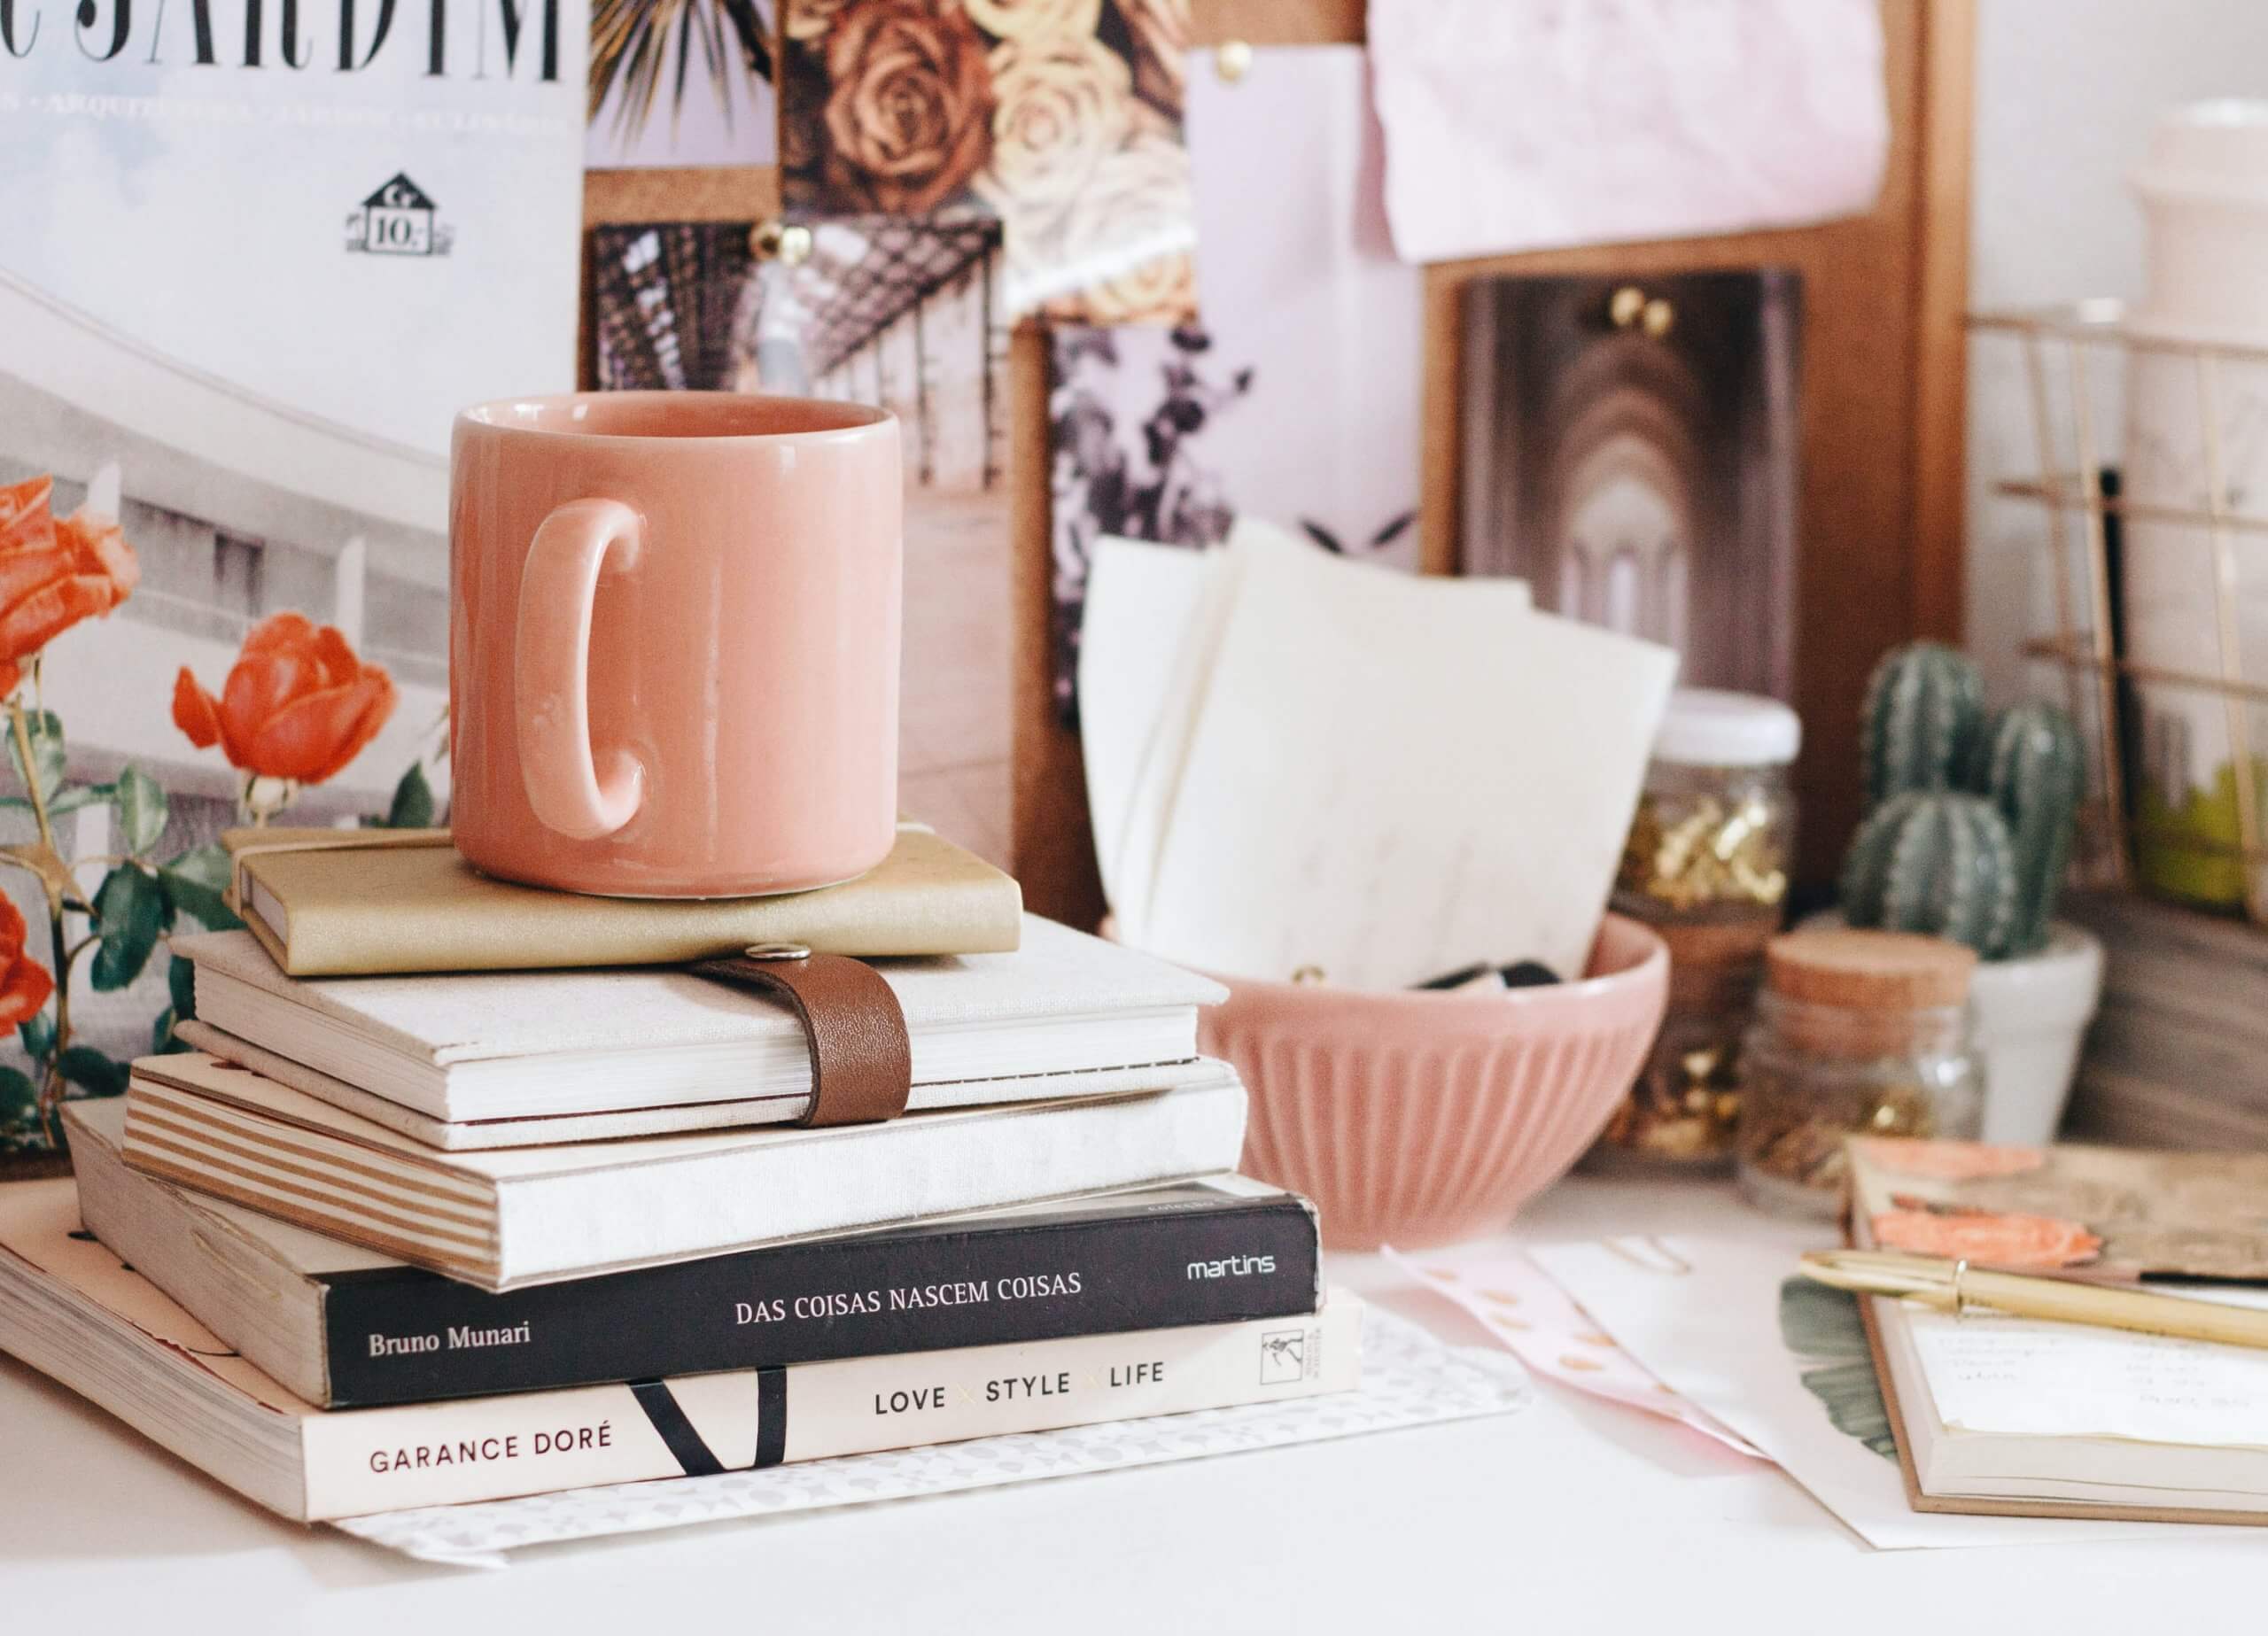 Books & Cup on Desk | The Mustcard